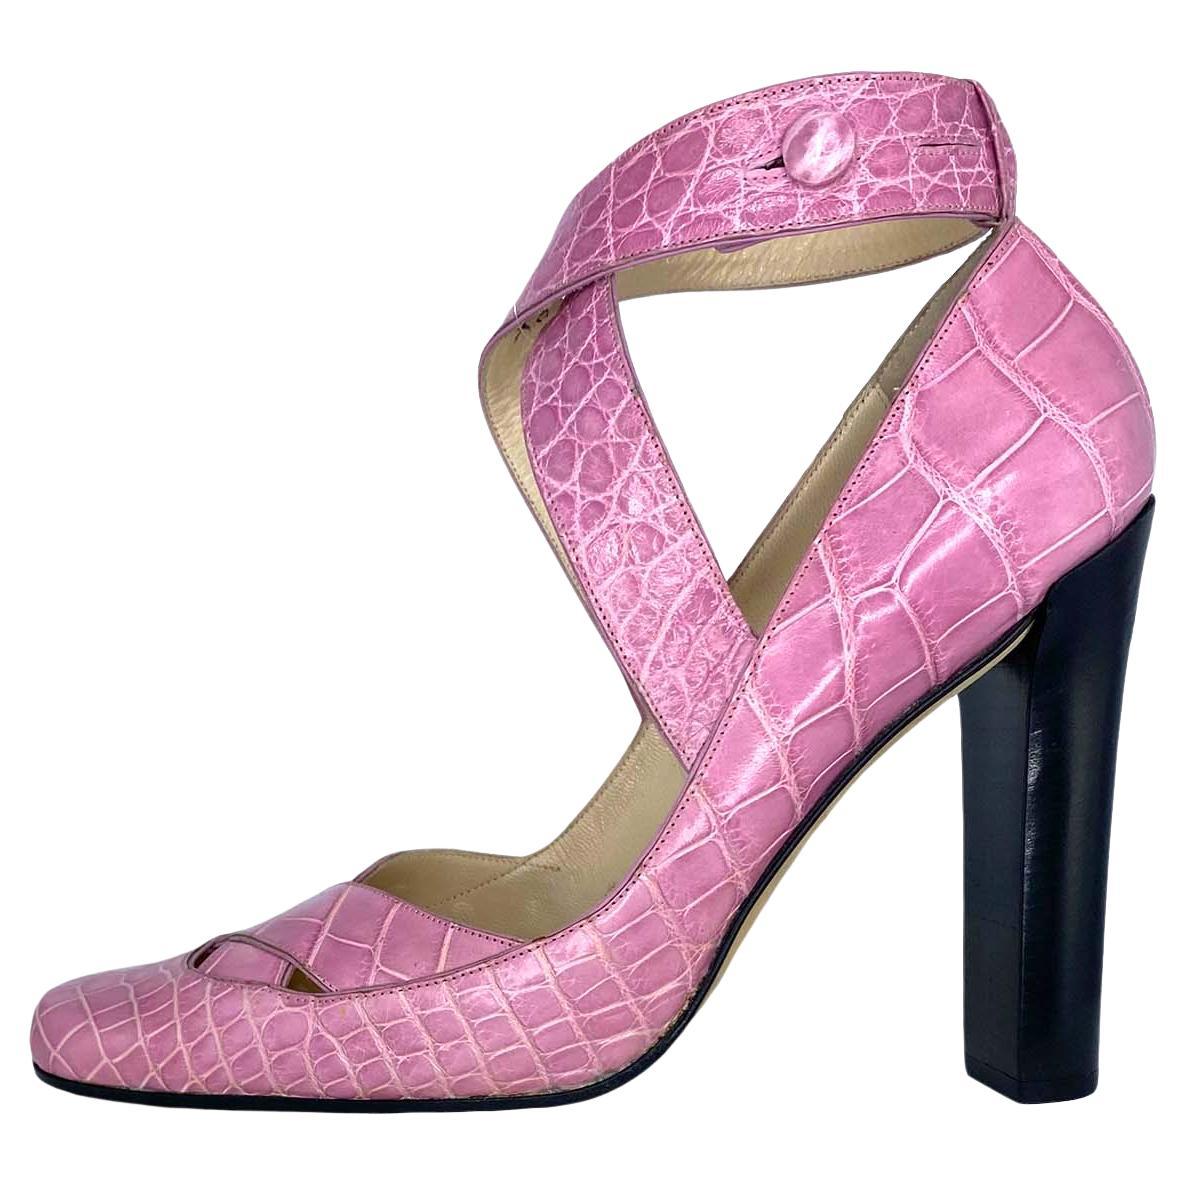 F/W 2001 Gucci by Tom Ford Pink Alligator Ballet Style 5" Heels  For Sale